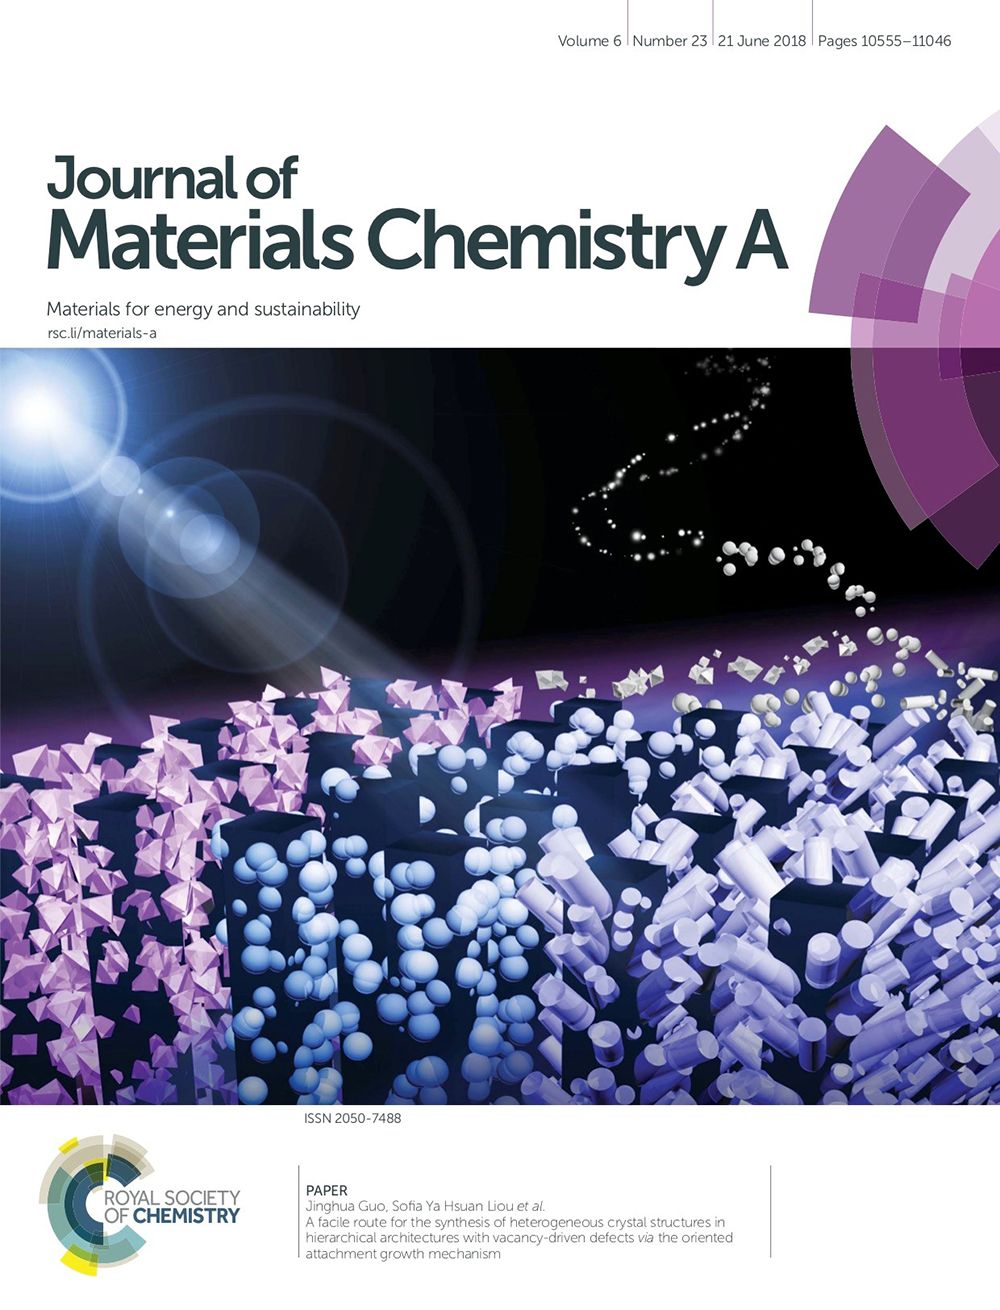 NTU study published and selected as a cover article in the renowned Journal of Material Chemistry A.